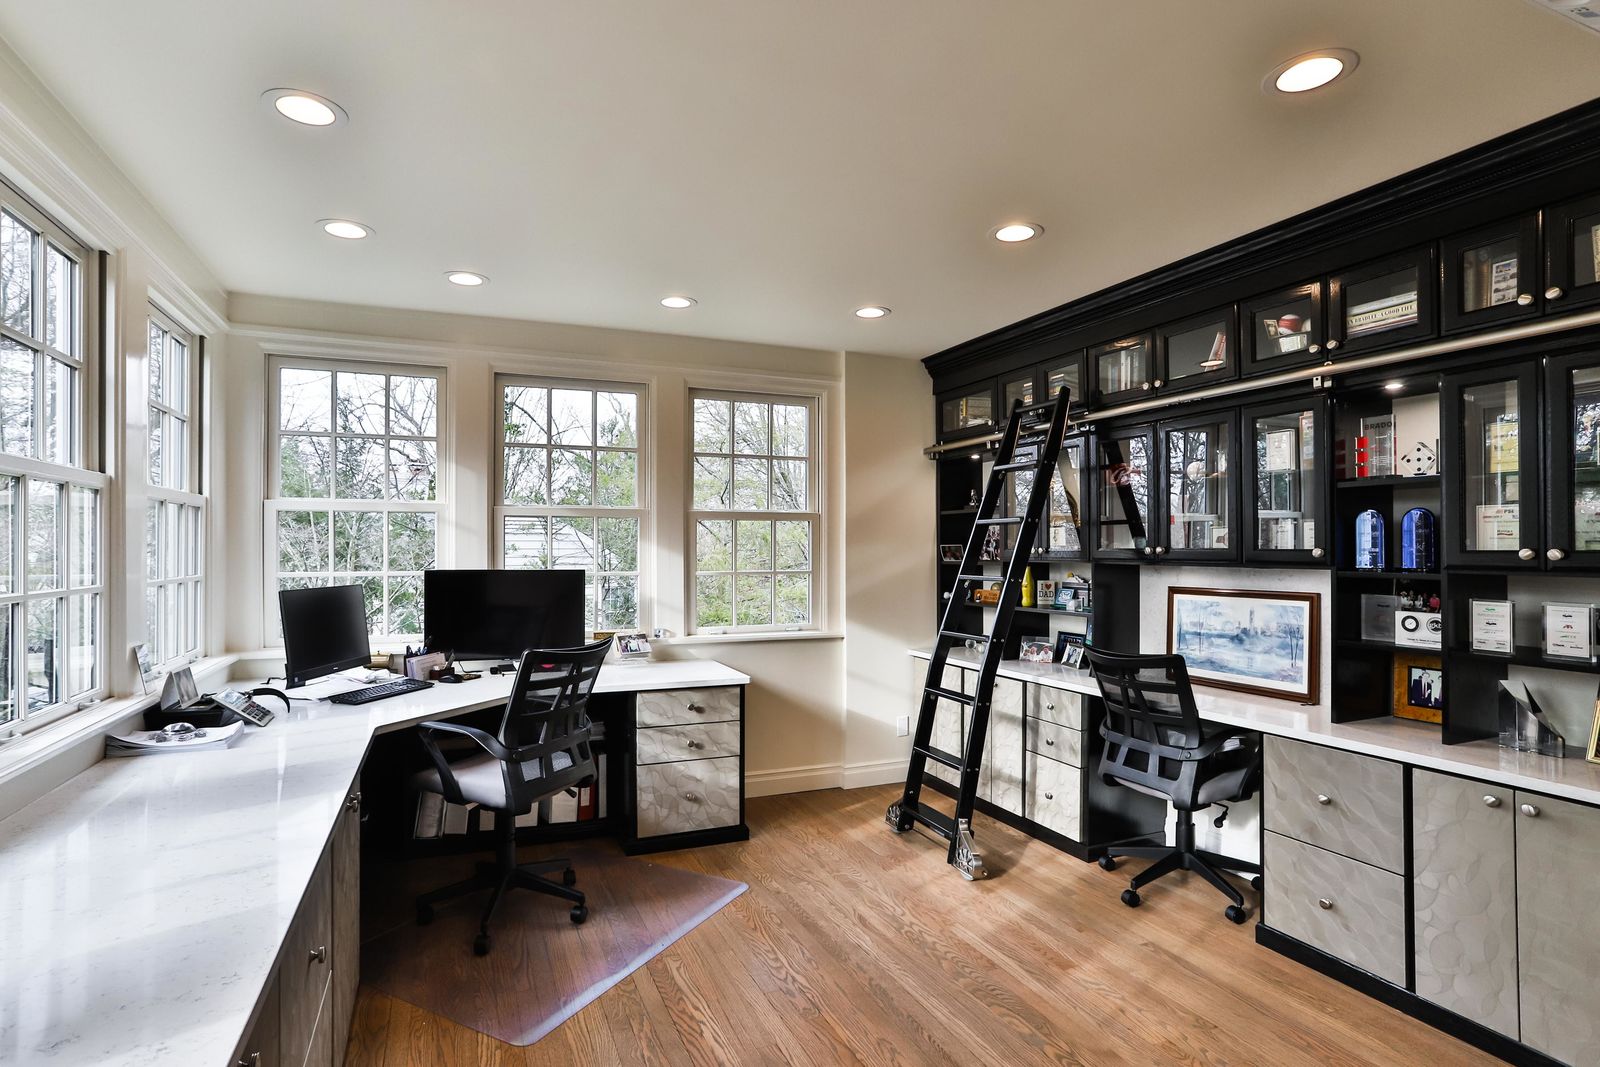 How To Make A Functional Home Office